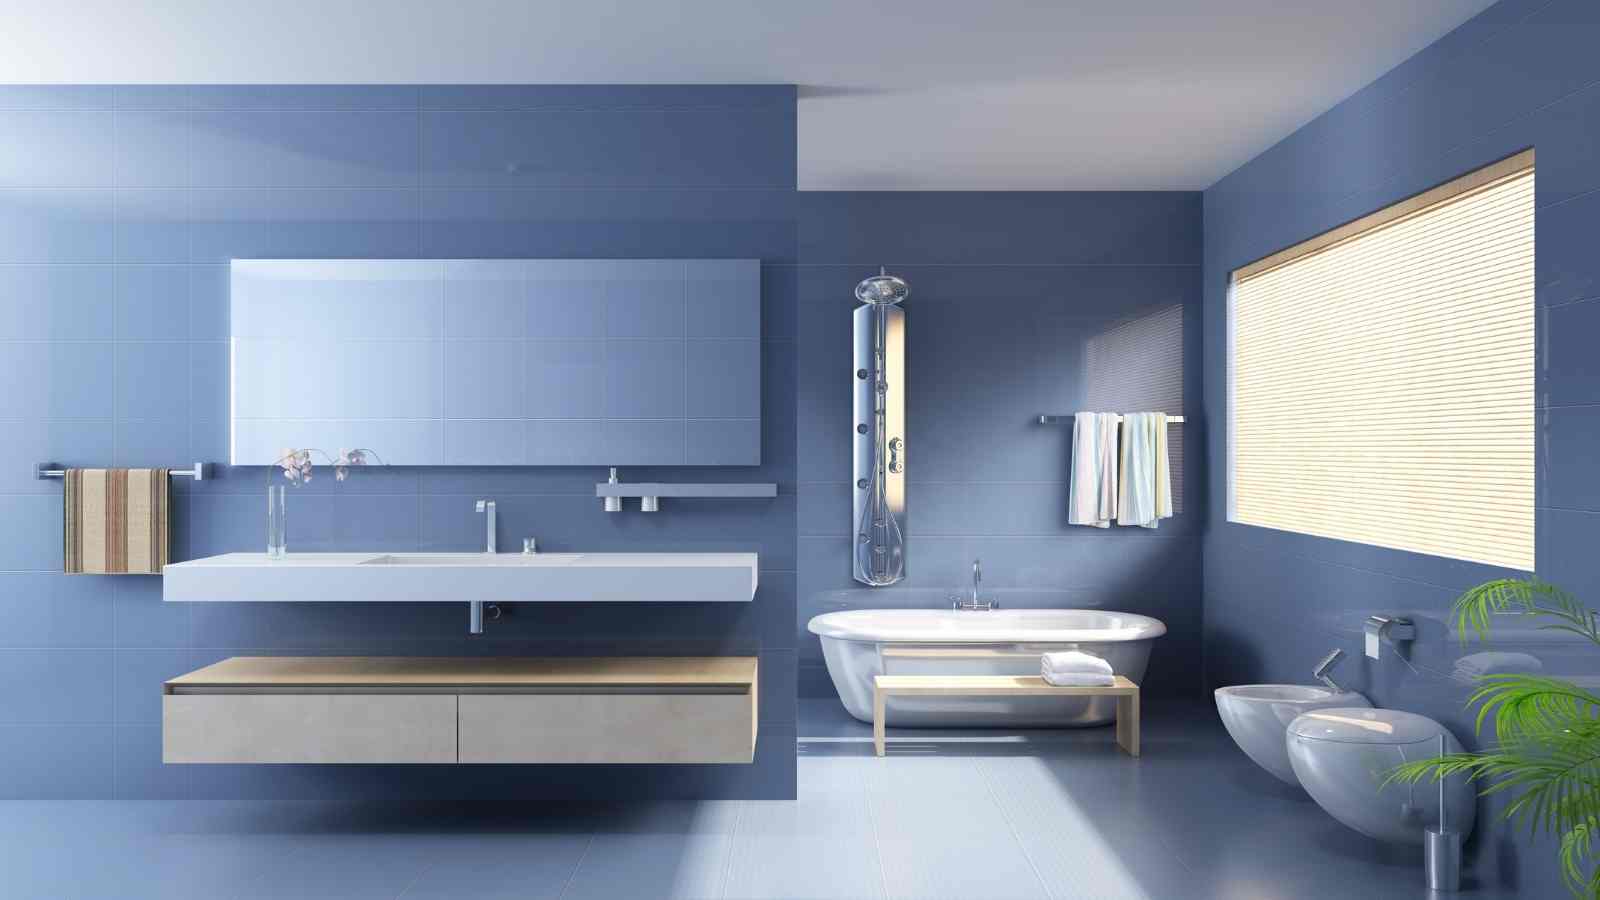 Upgrading Your Bathroom With World-Class Amenities